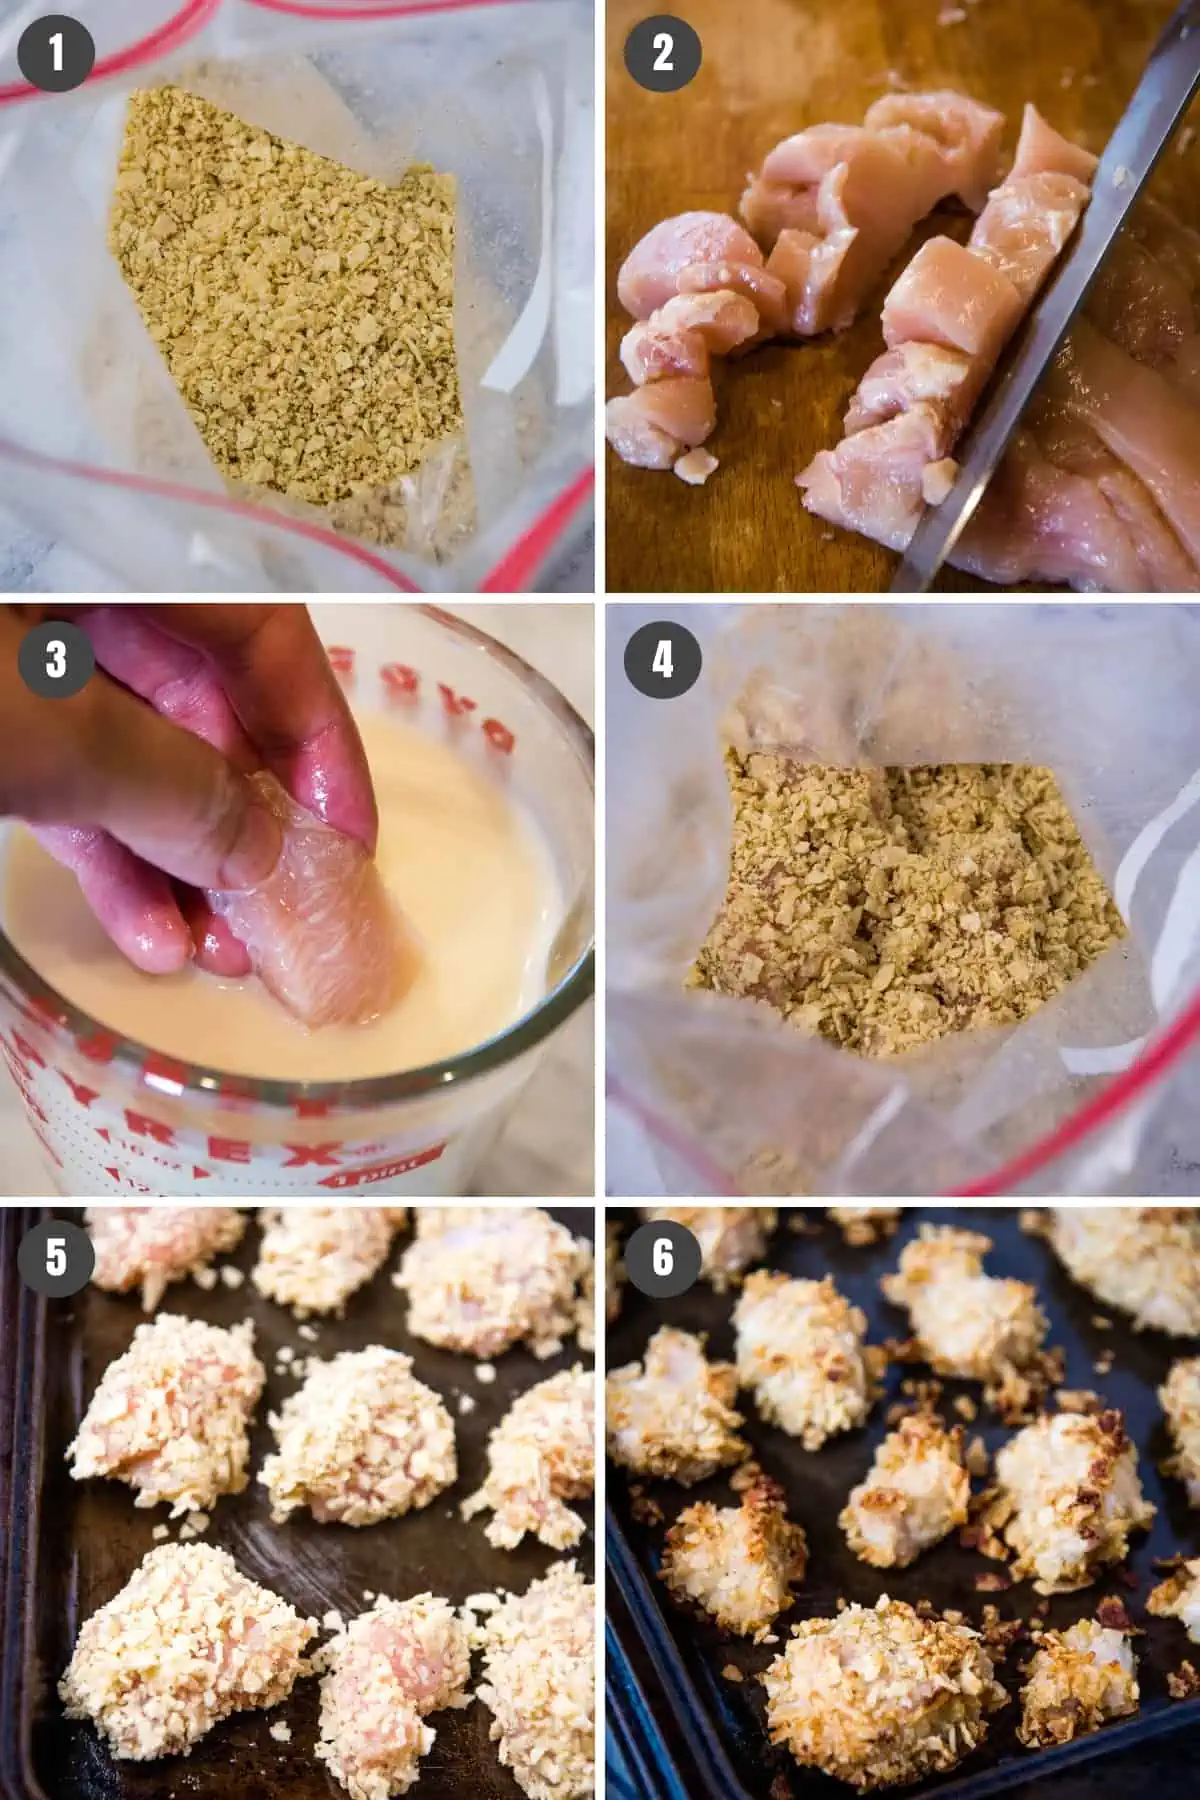 steps for how to make Pringles chicken recipe, including crushing Pringles chips, cutting up chicken, coating and breading chicken, and baking